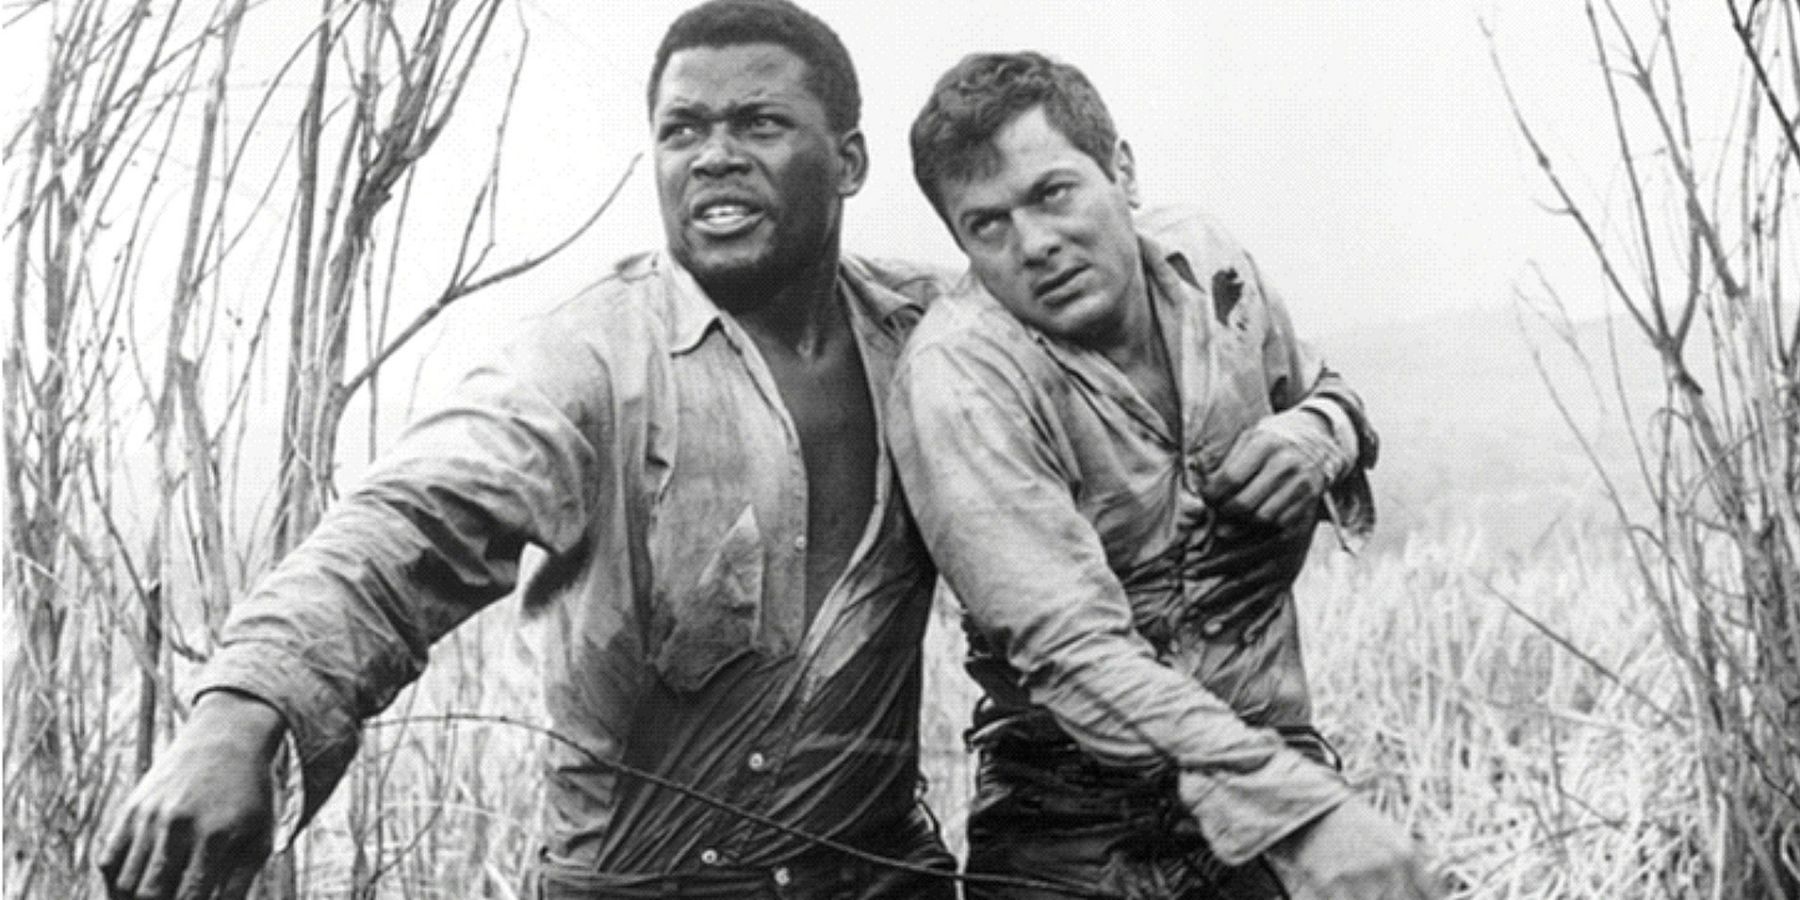 Sidney Poitier and Tony Curtis chained next to each other and walking among bushes in The Defiant Ones